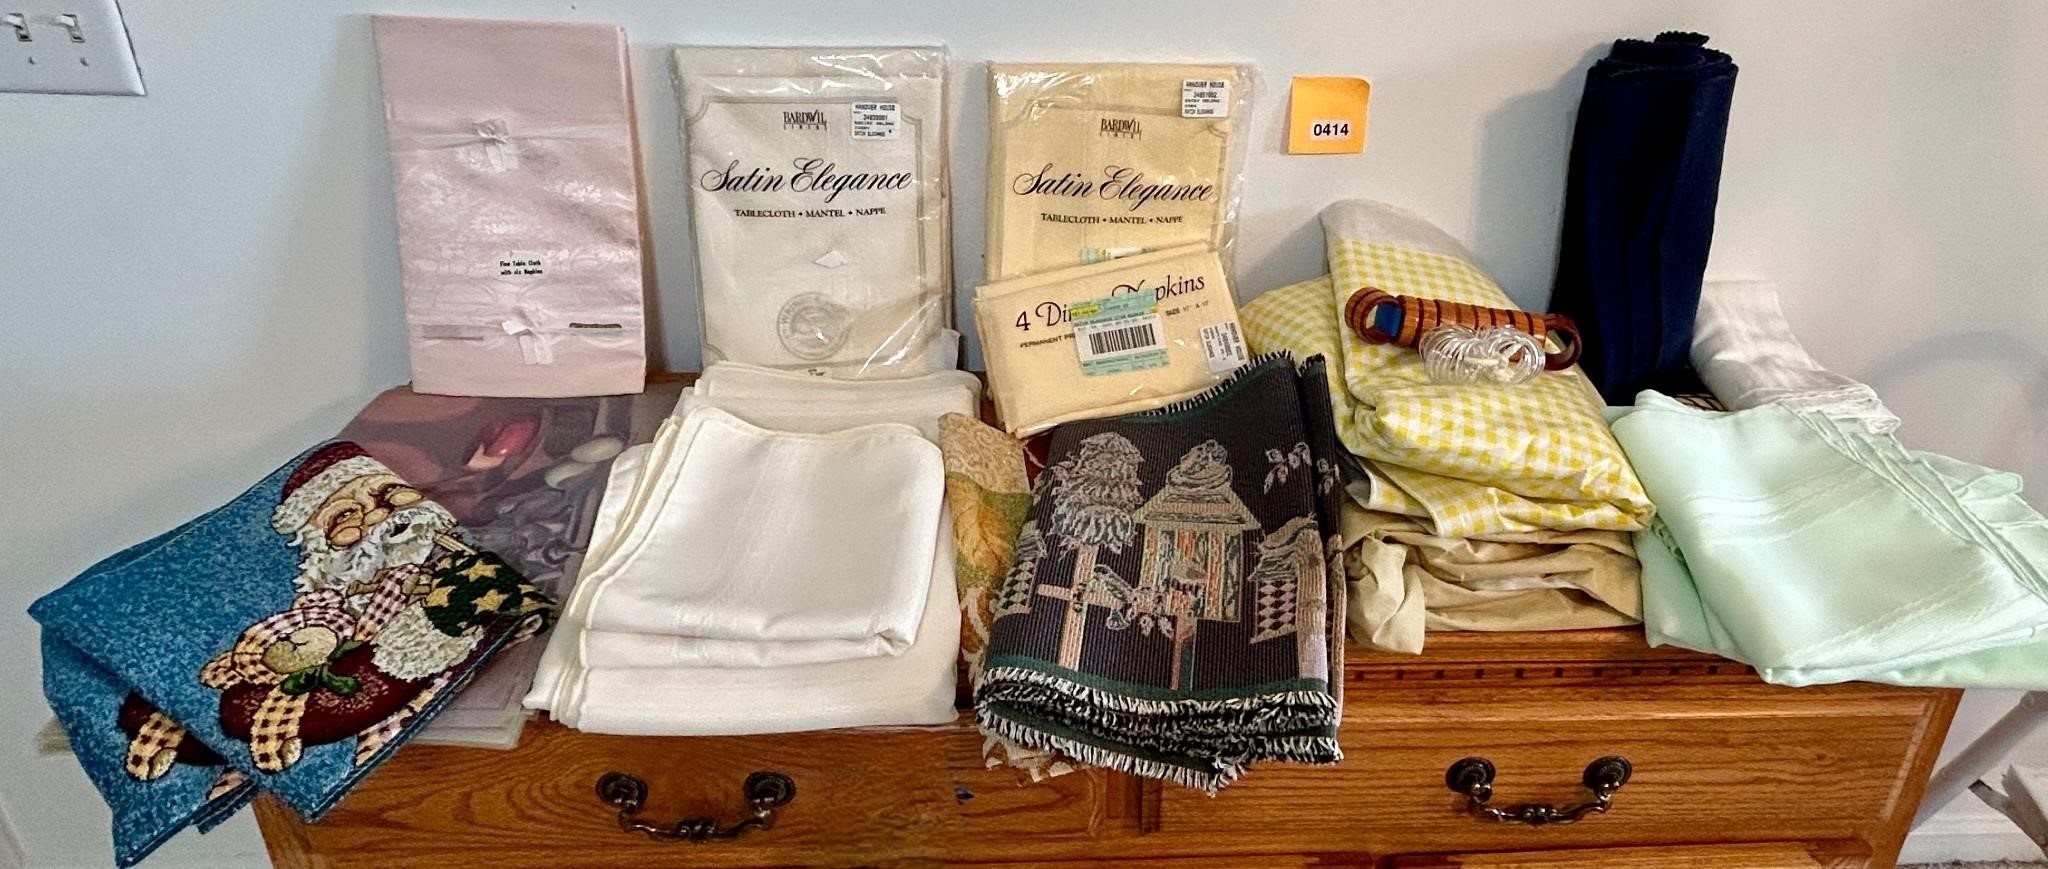 Placemats, Tablecloths and Napkins!